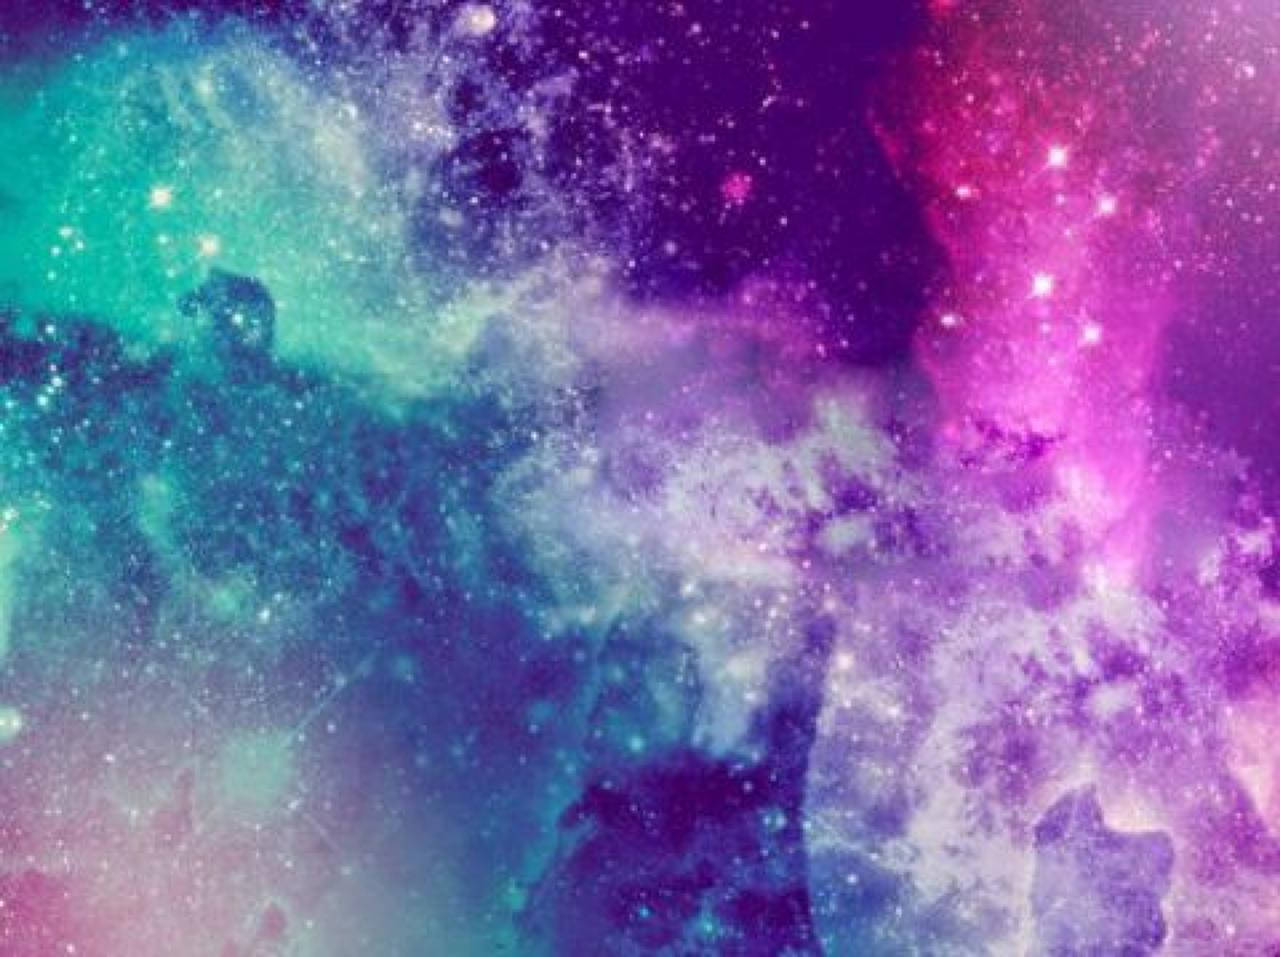 “Explore the Infinite Possibilities of a Colorful, Dreamy Girly Galaxy.” Wallpaper